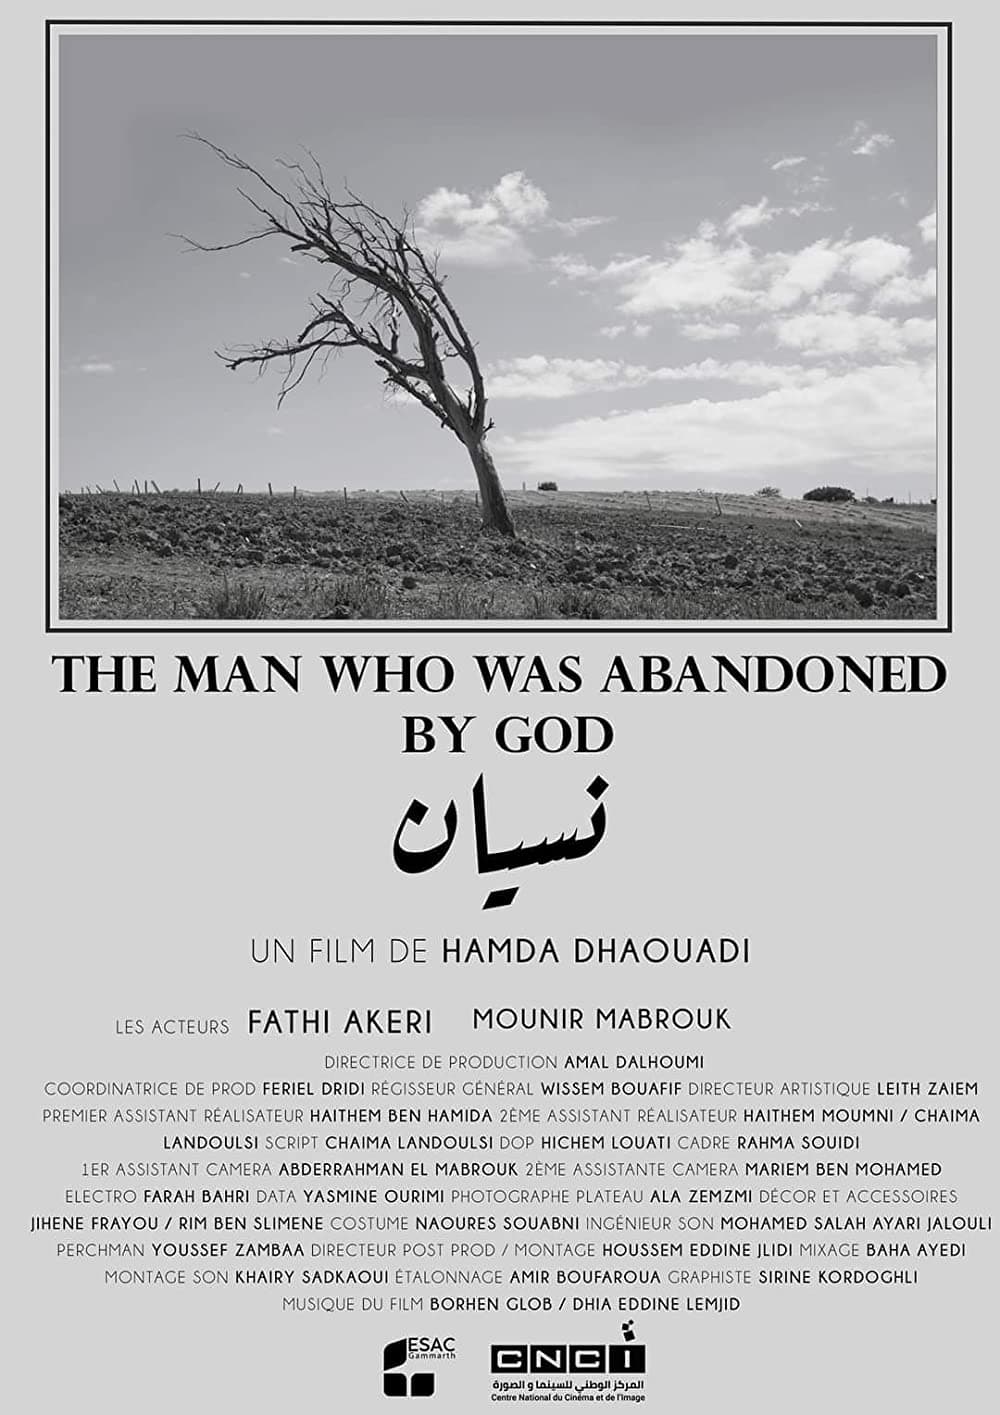 The Man Who Was Abandoned by God